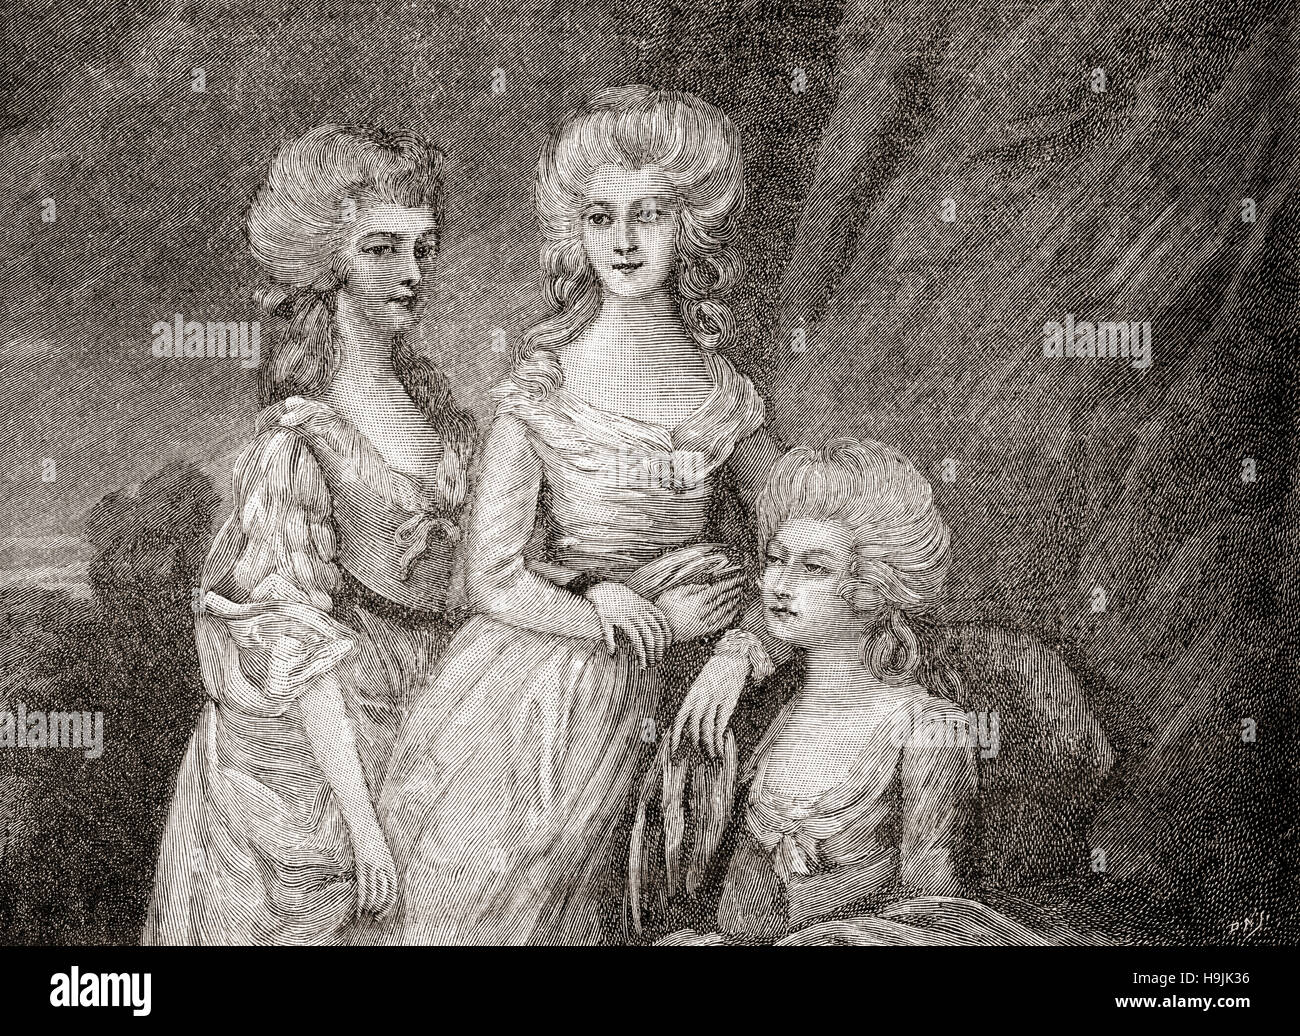 The three eldest daughters of King George III. From left to right: Charlotte, Princess Royal, 1766 –1828. She was Queen of Württemberg as the wife of King Frederick;  Princess Augusta Sophia of the United Kingdom, 1768 – 1840 and Princess Elizabeth of the United Kingdom, 1770 – 1840. Stock Photo